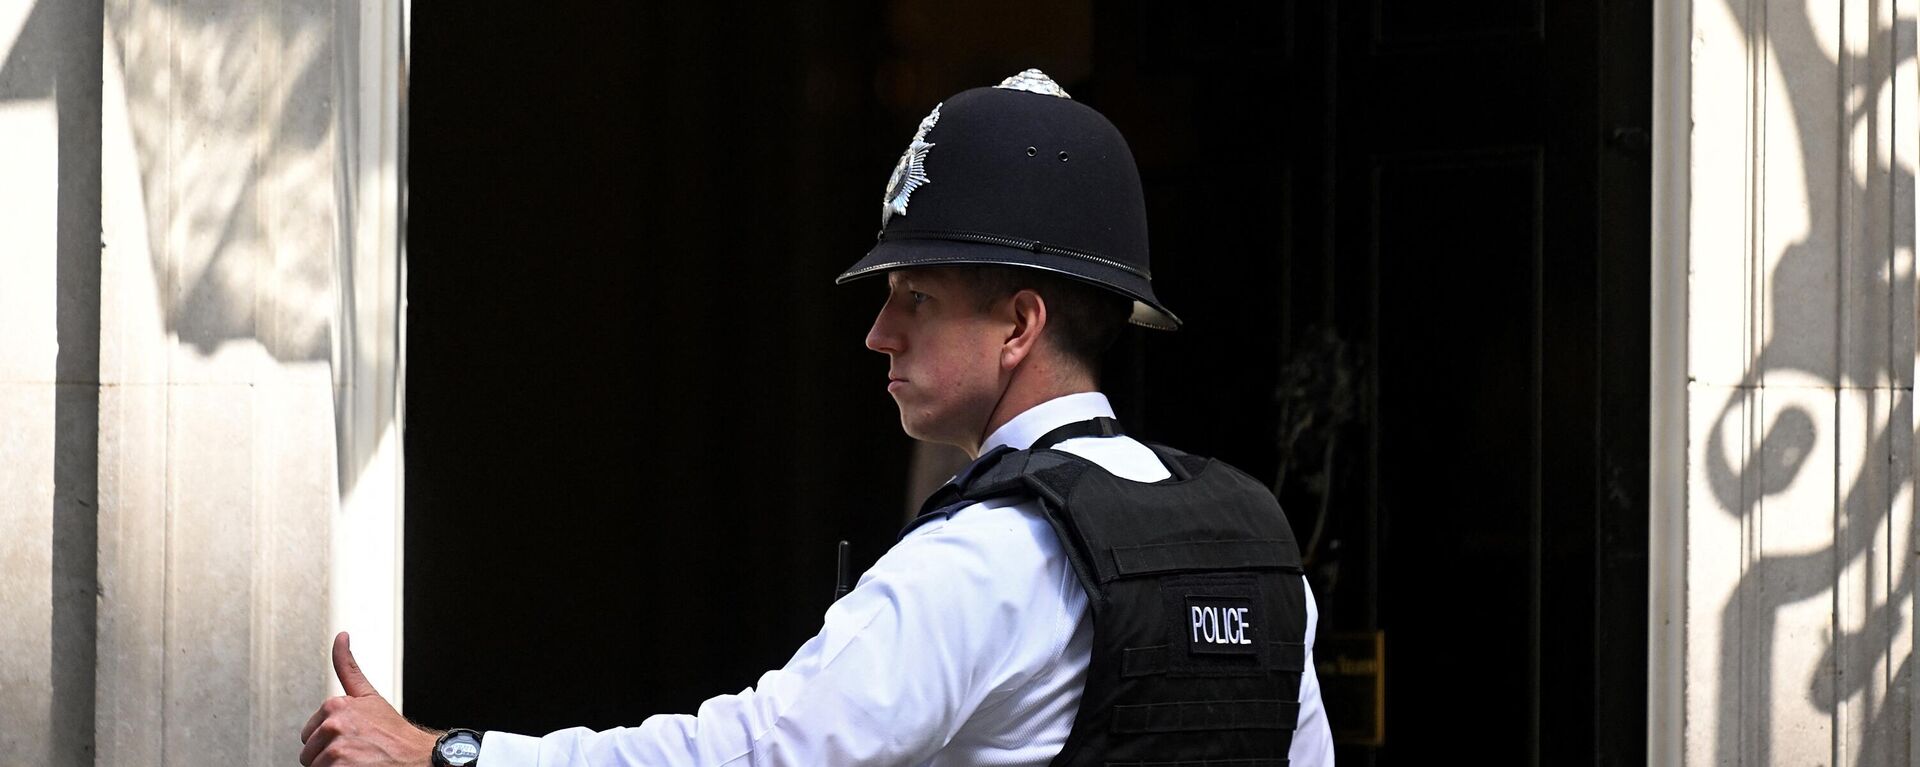 A police officer gestures as he stands outside the entrance to 10 Downing Street, the official residence of Britain's Prime Minister, in central London, on April 20, 2022. - Sputnik International, 1920, 12.05.2022